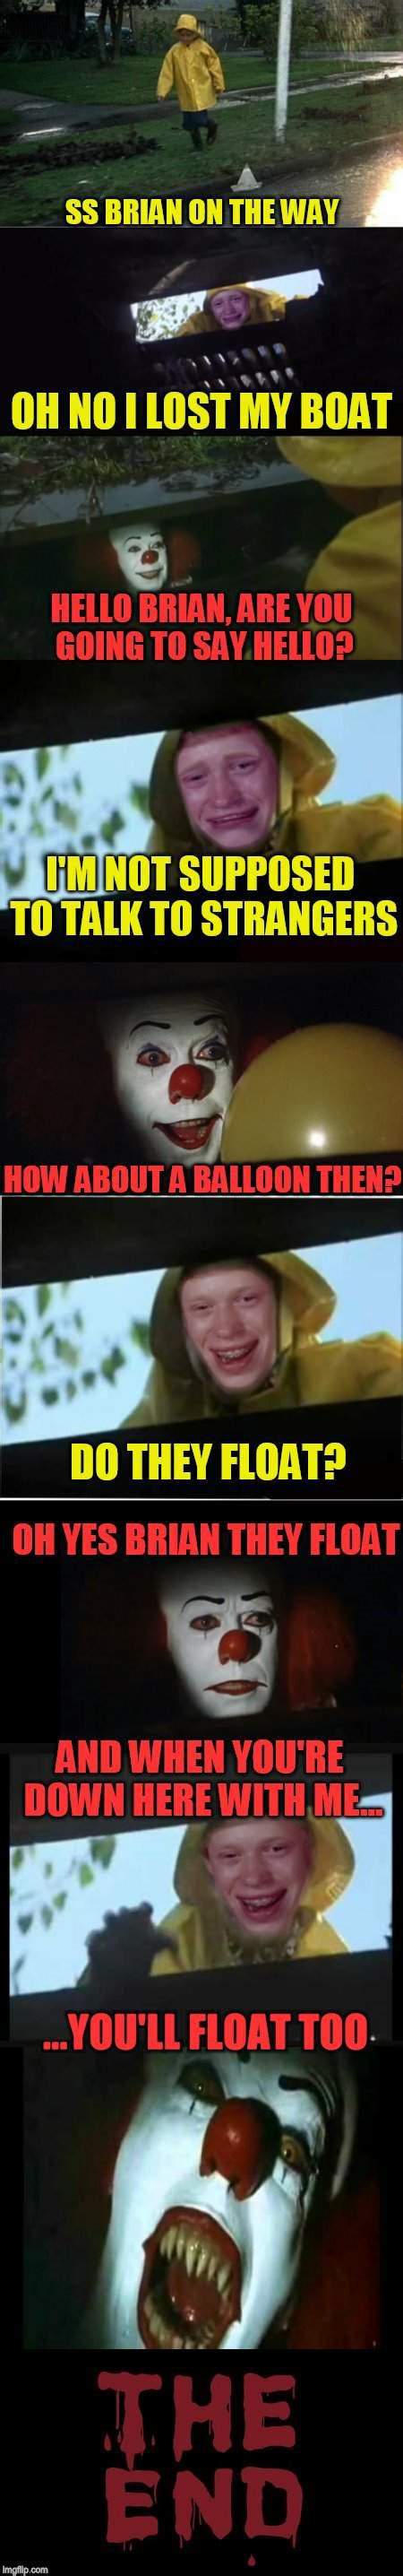 Pennywise The Clown Meme